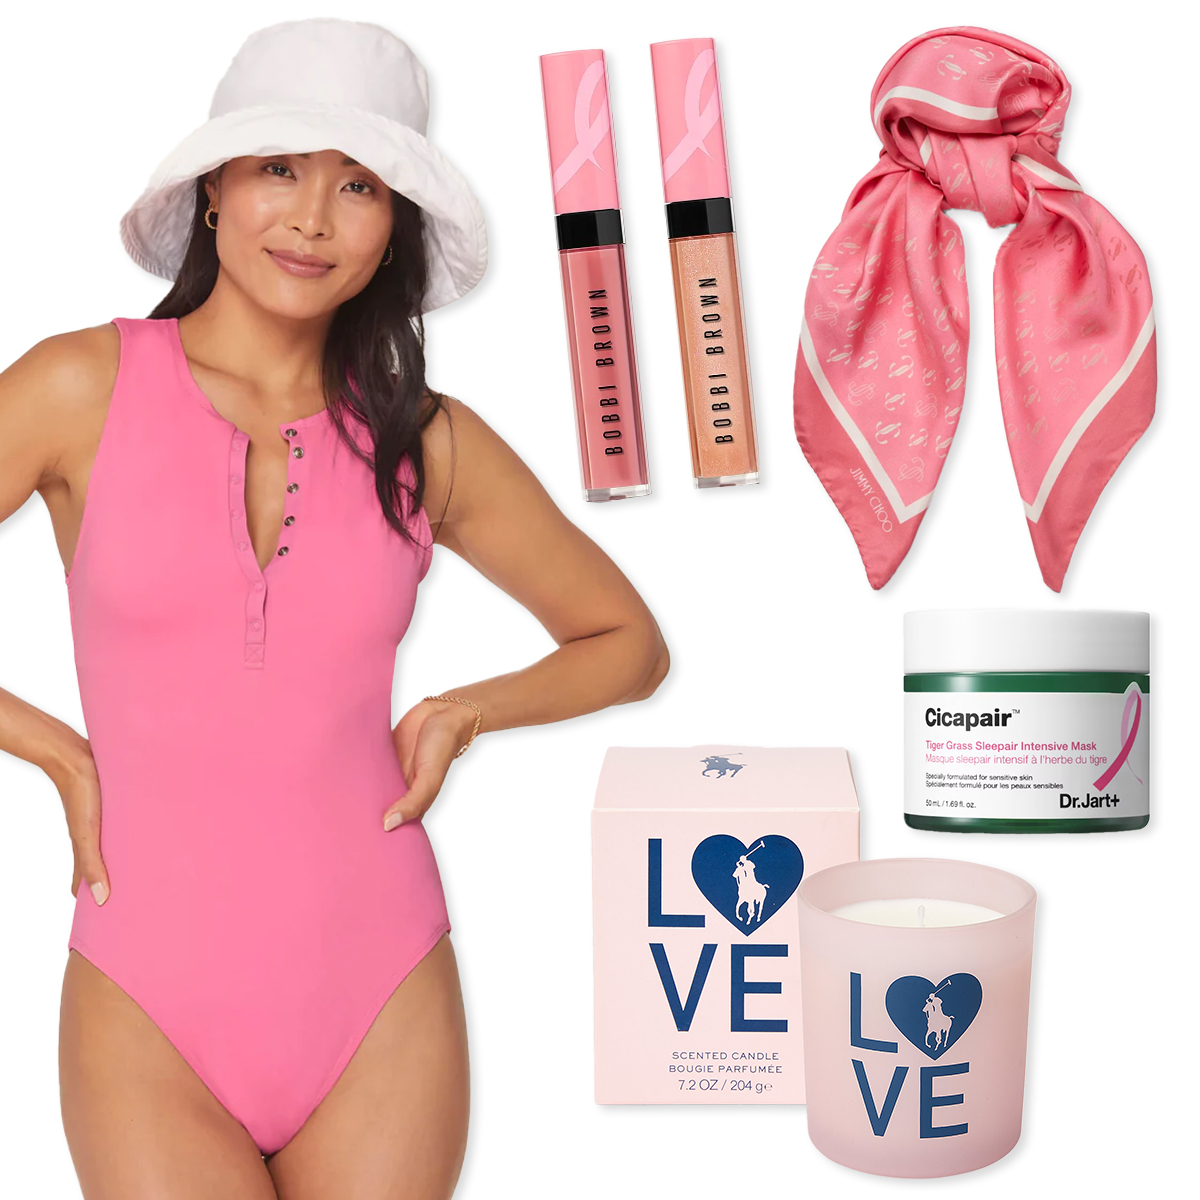 12 Products Supporting Breast Cancer Awareness Month From Bobbi Brown, Ralph Lauren, Gorjana & More